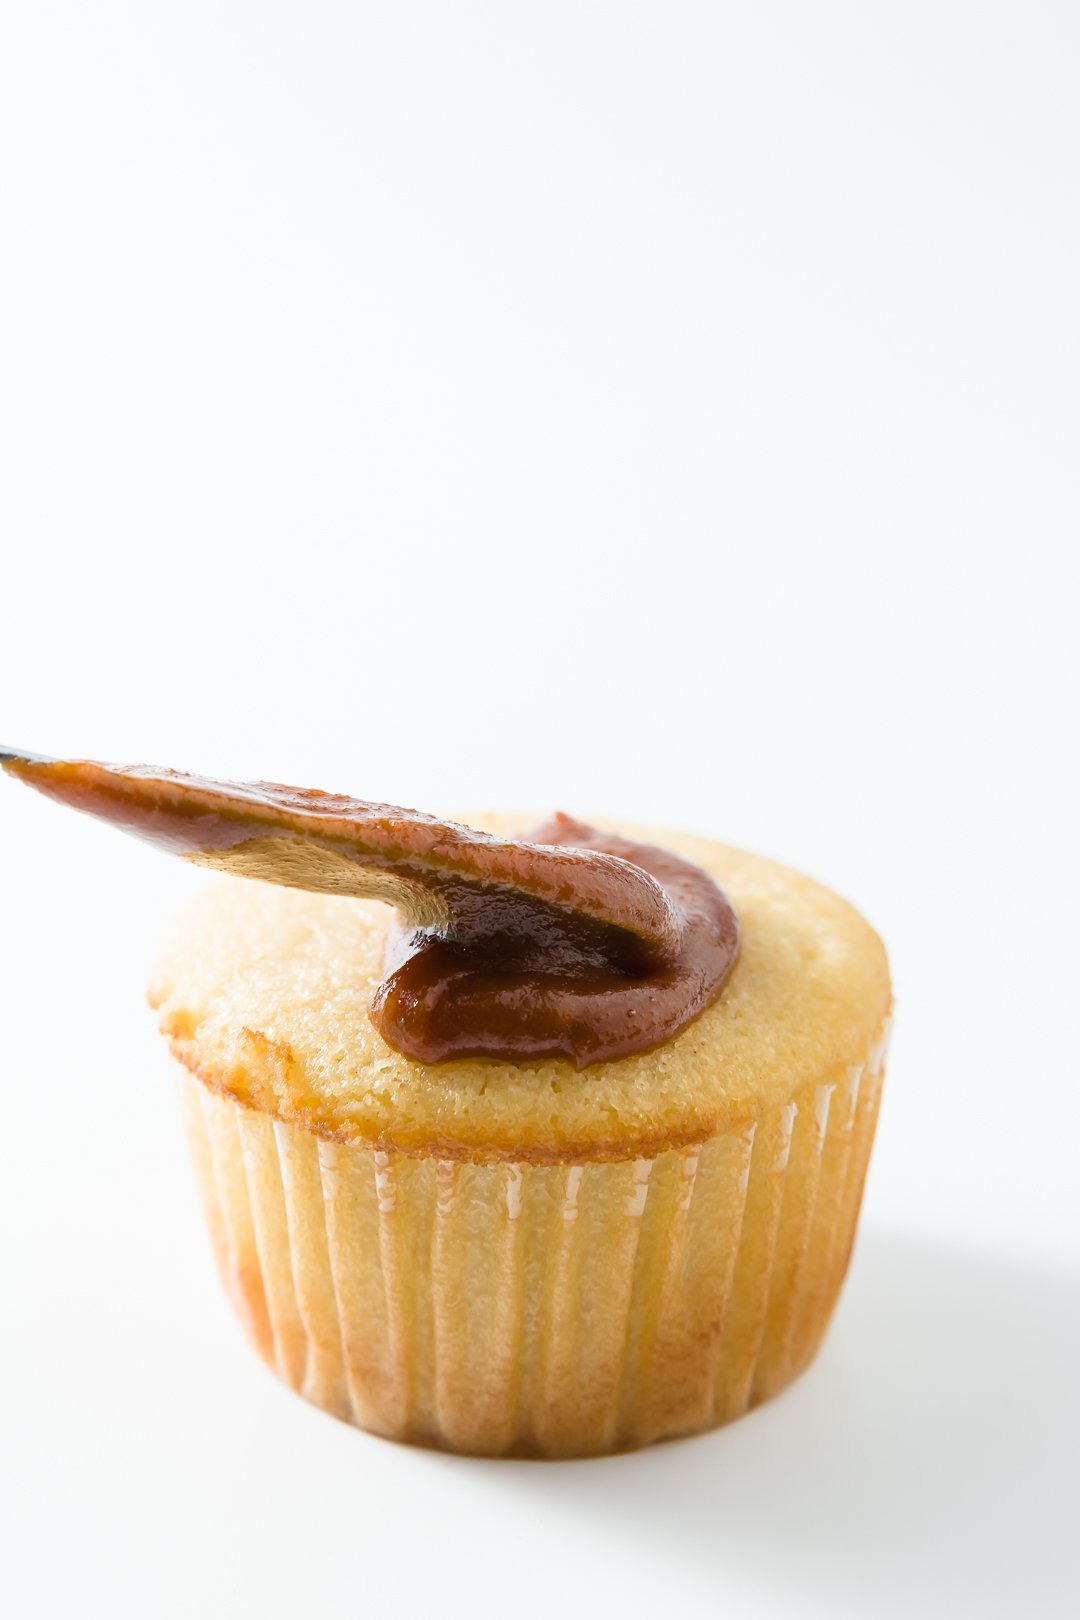 Caramel icing being spread onto a cupcake